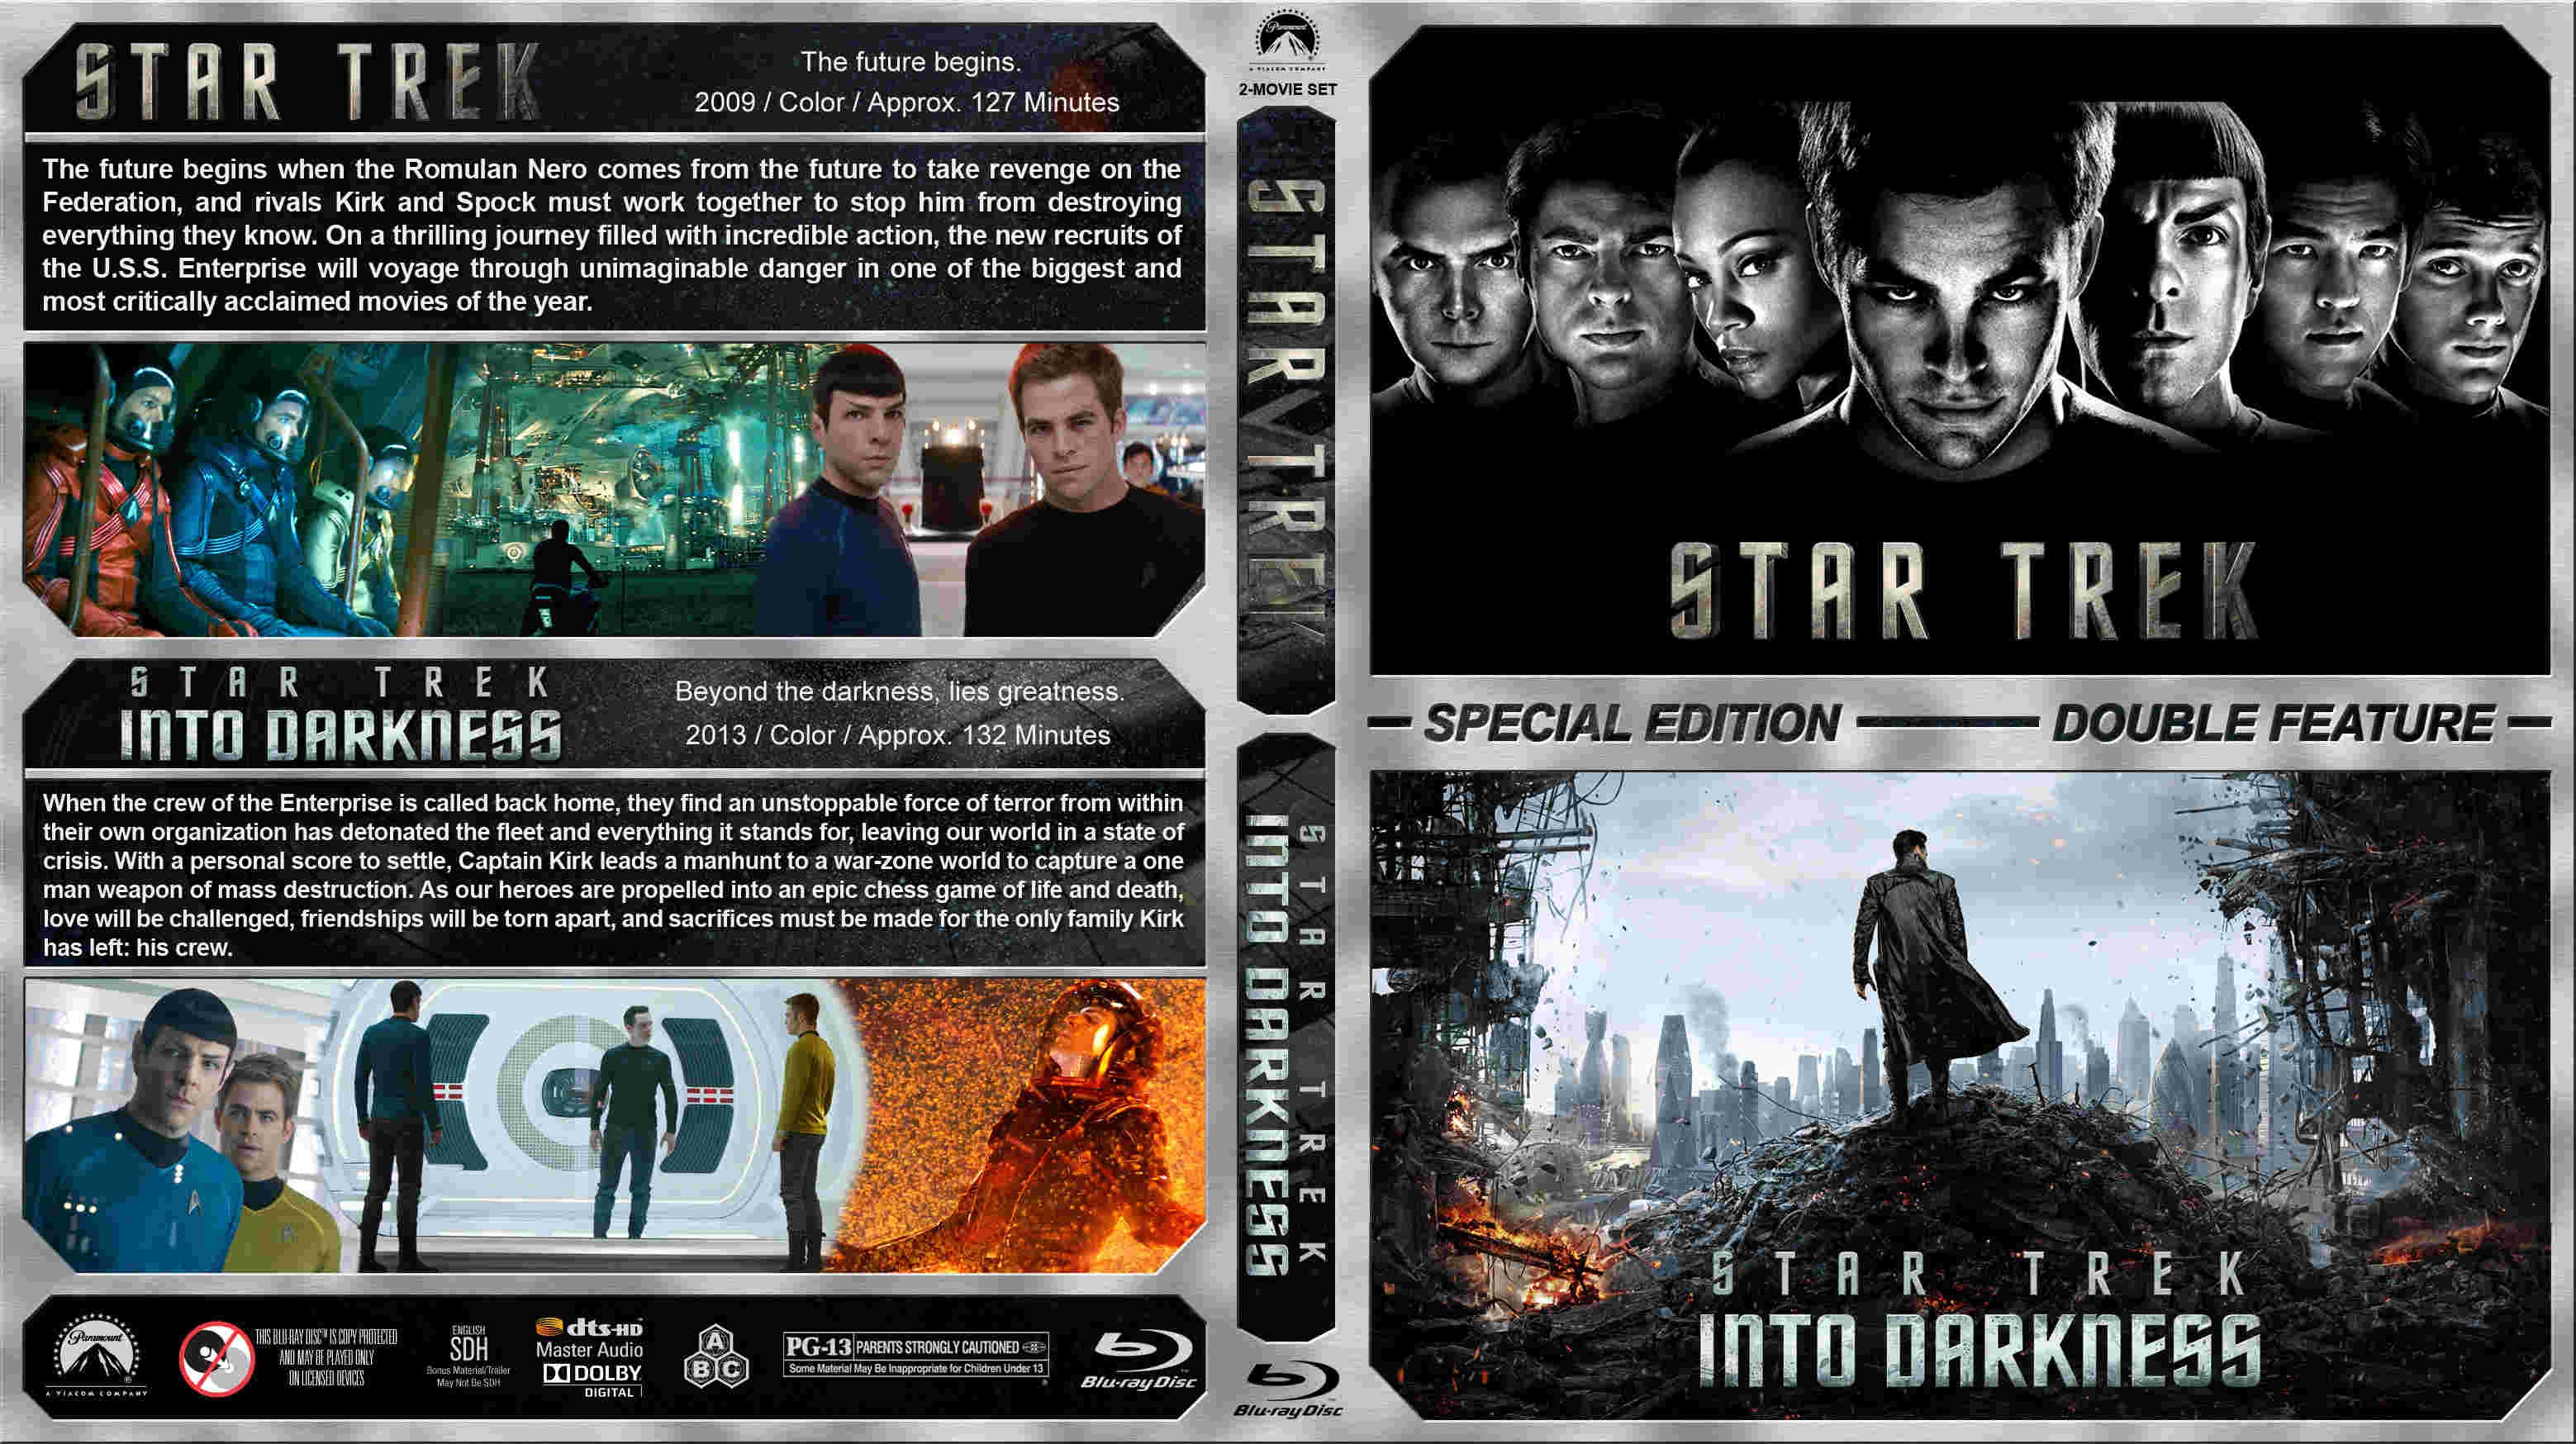 Star Trek Double Feature box cover